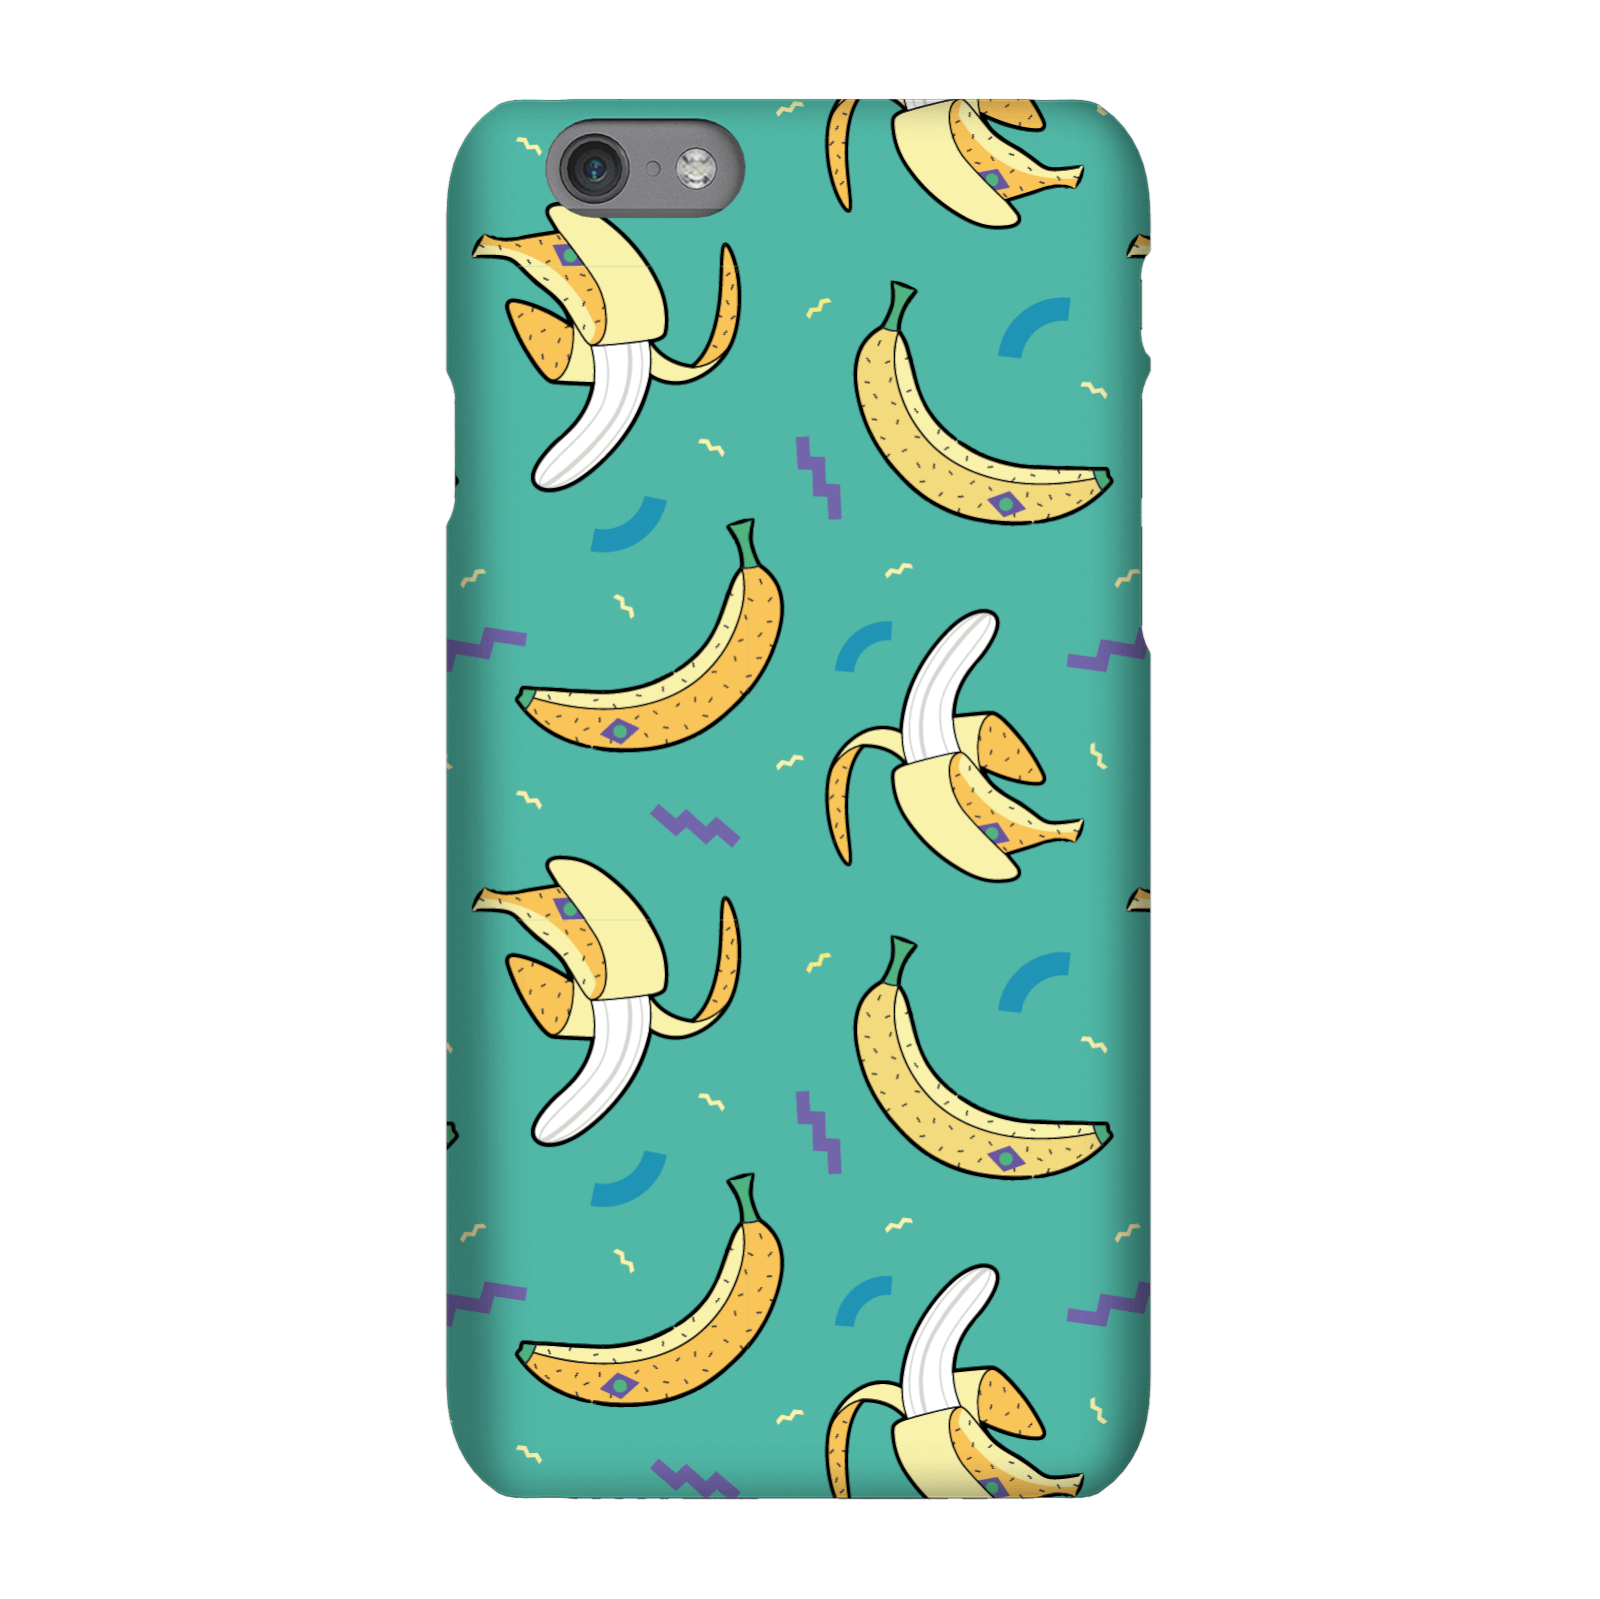 Banana Pattern Phone Case for iPhone and Android - Samsung Note 8 - Tough Case - Matte